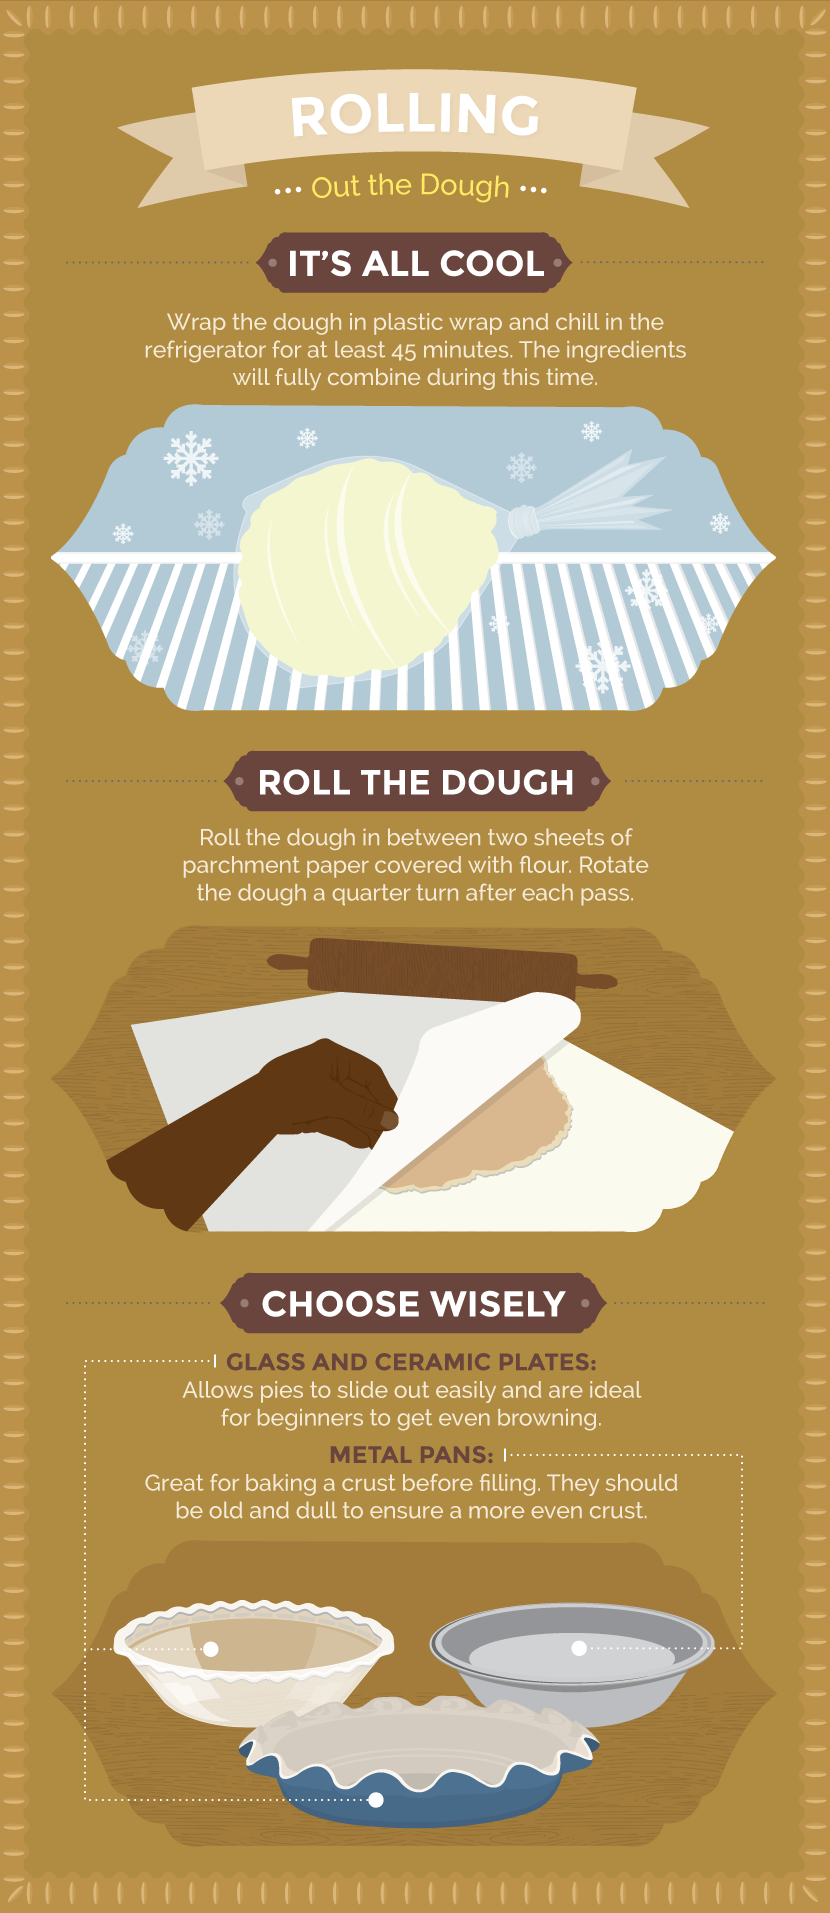 Rolling Out The Dough - Perfecting Pie Dough